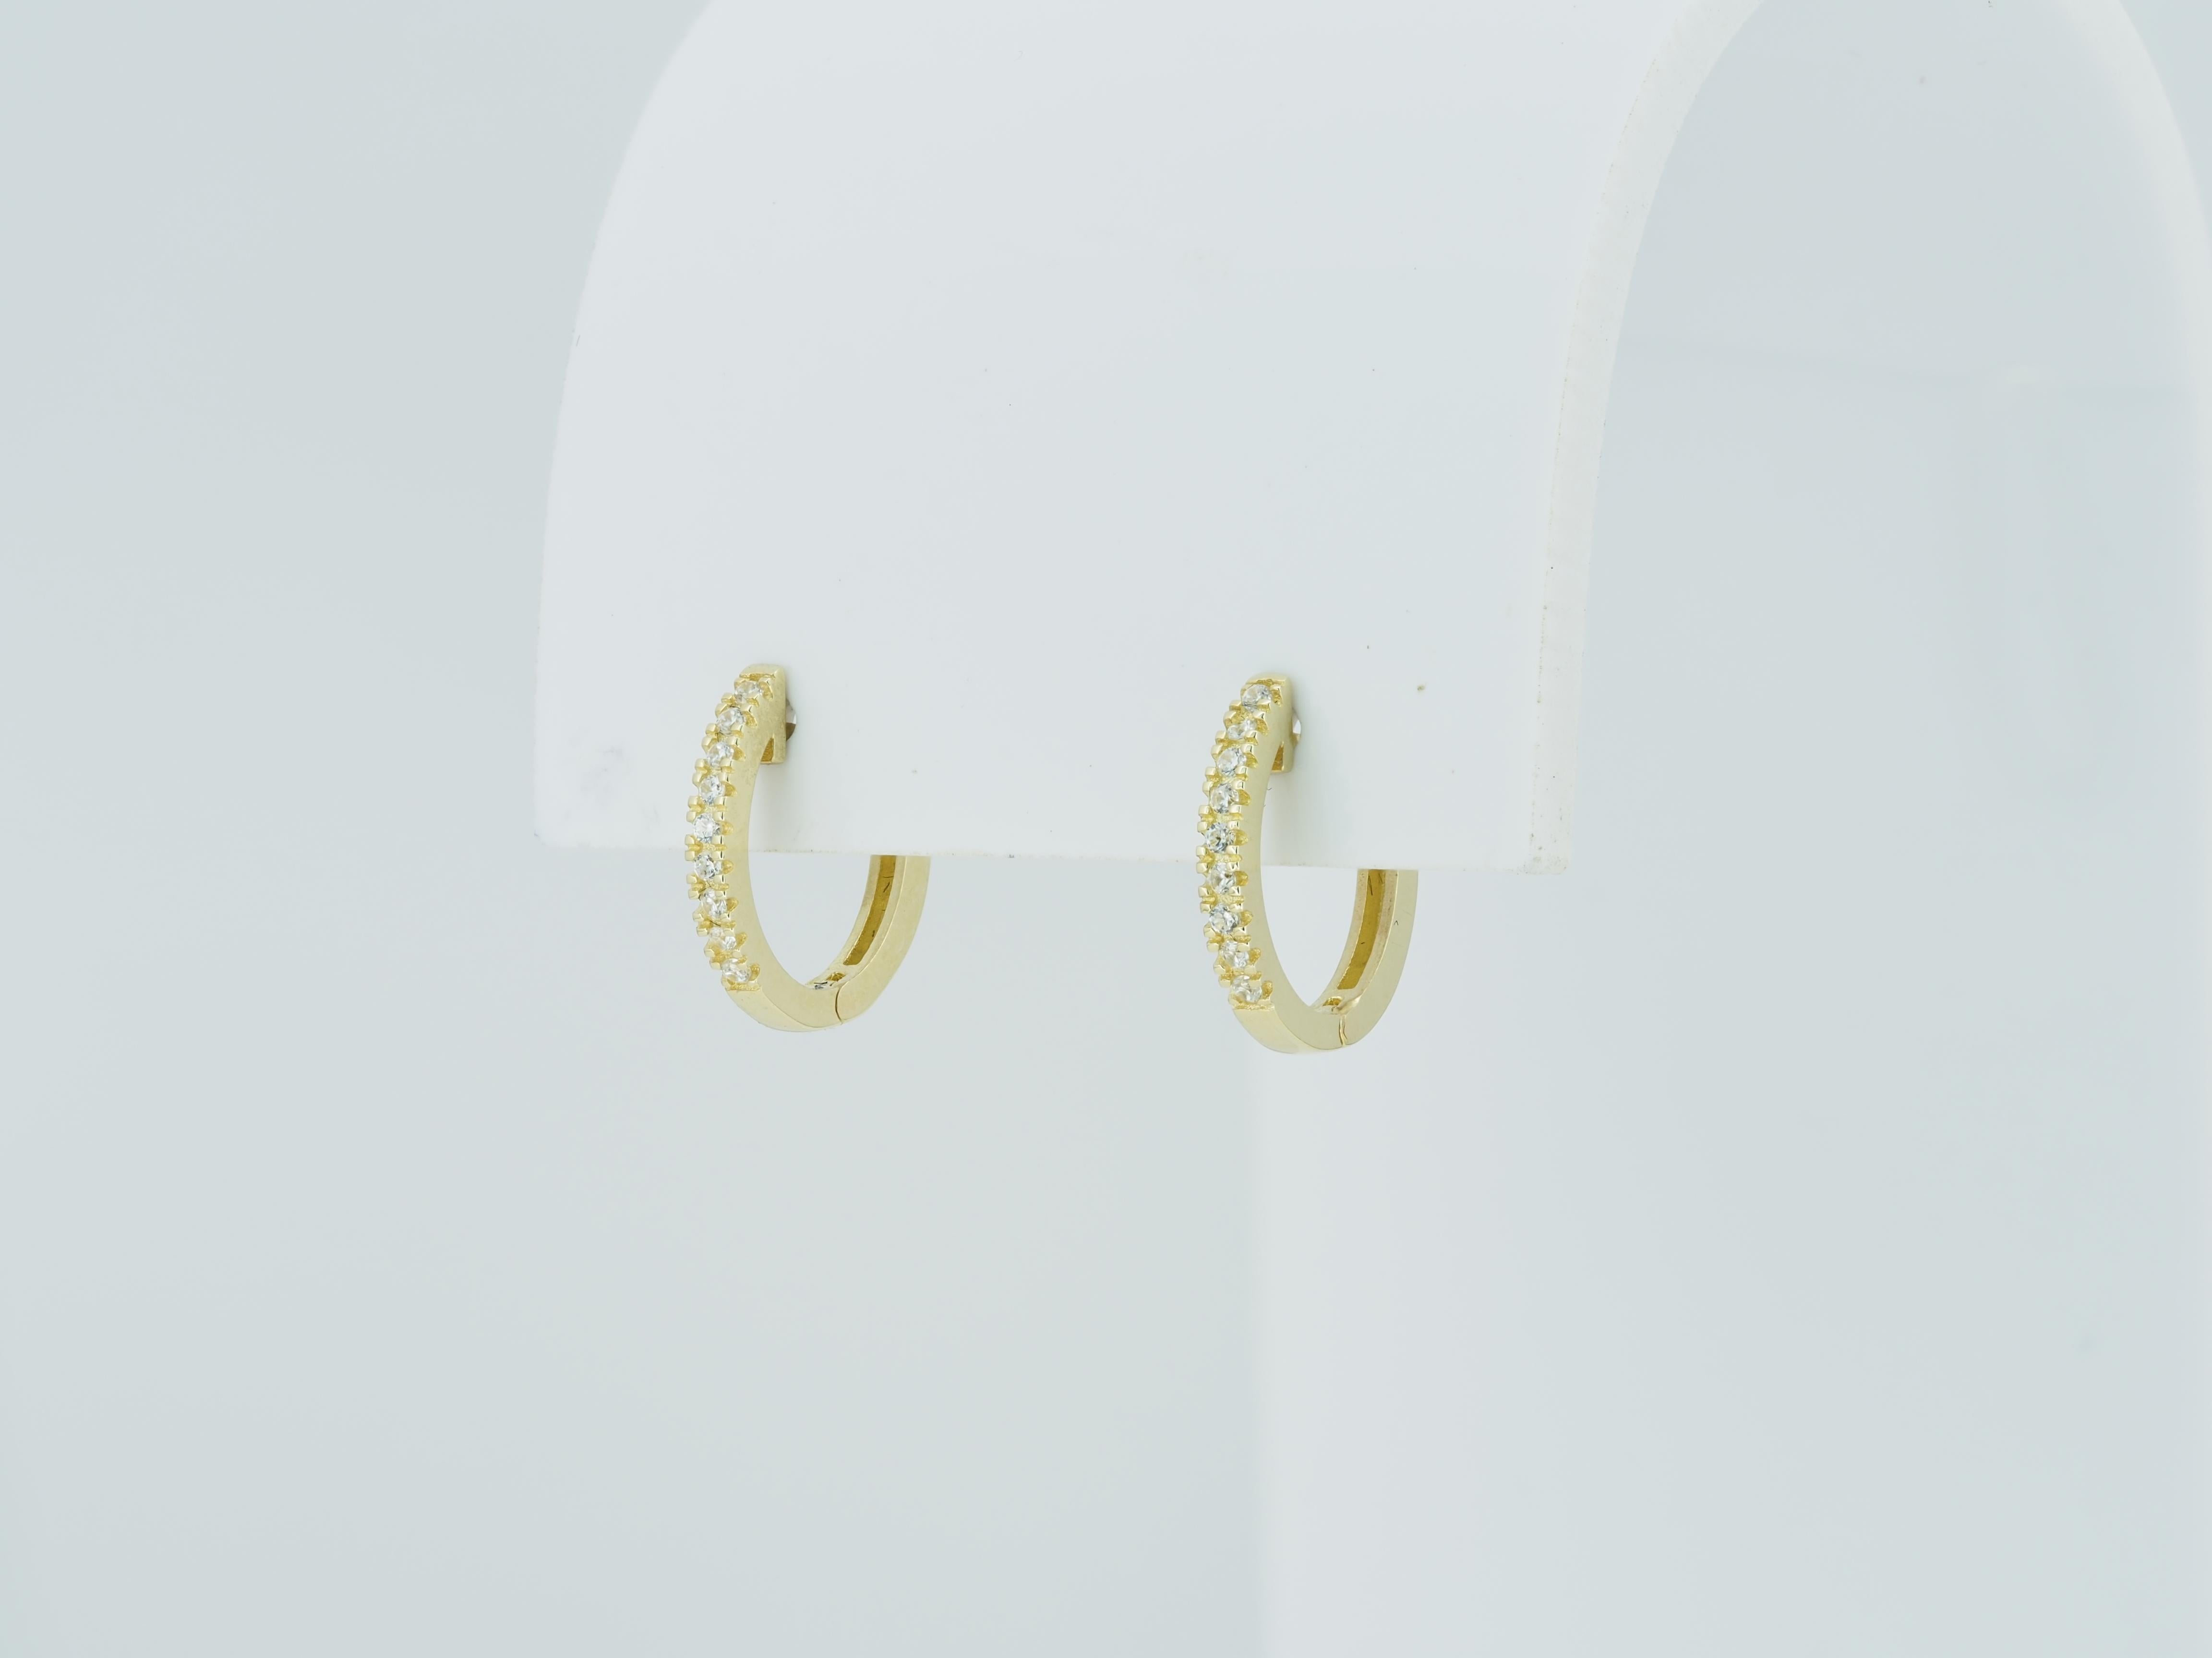 Contemporary Tiny Huggie Hoop Earrings in 14 Karat Yellow Gold. For Sale